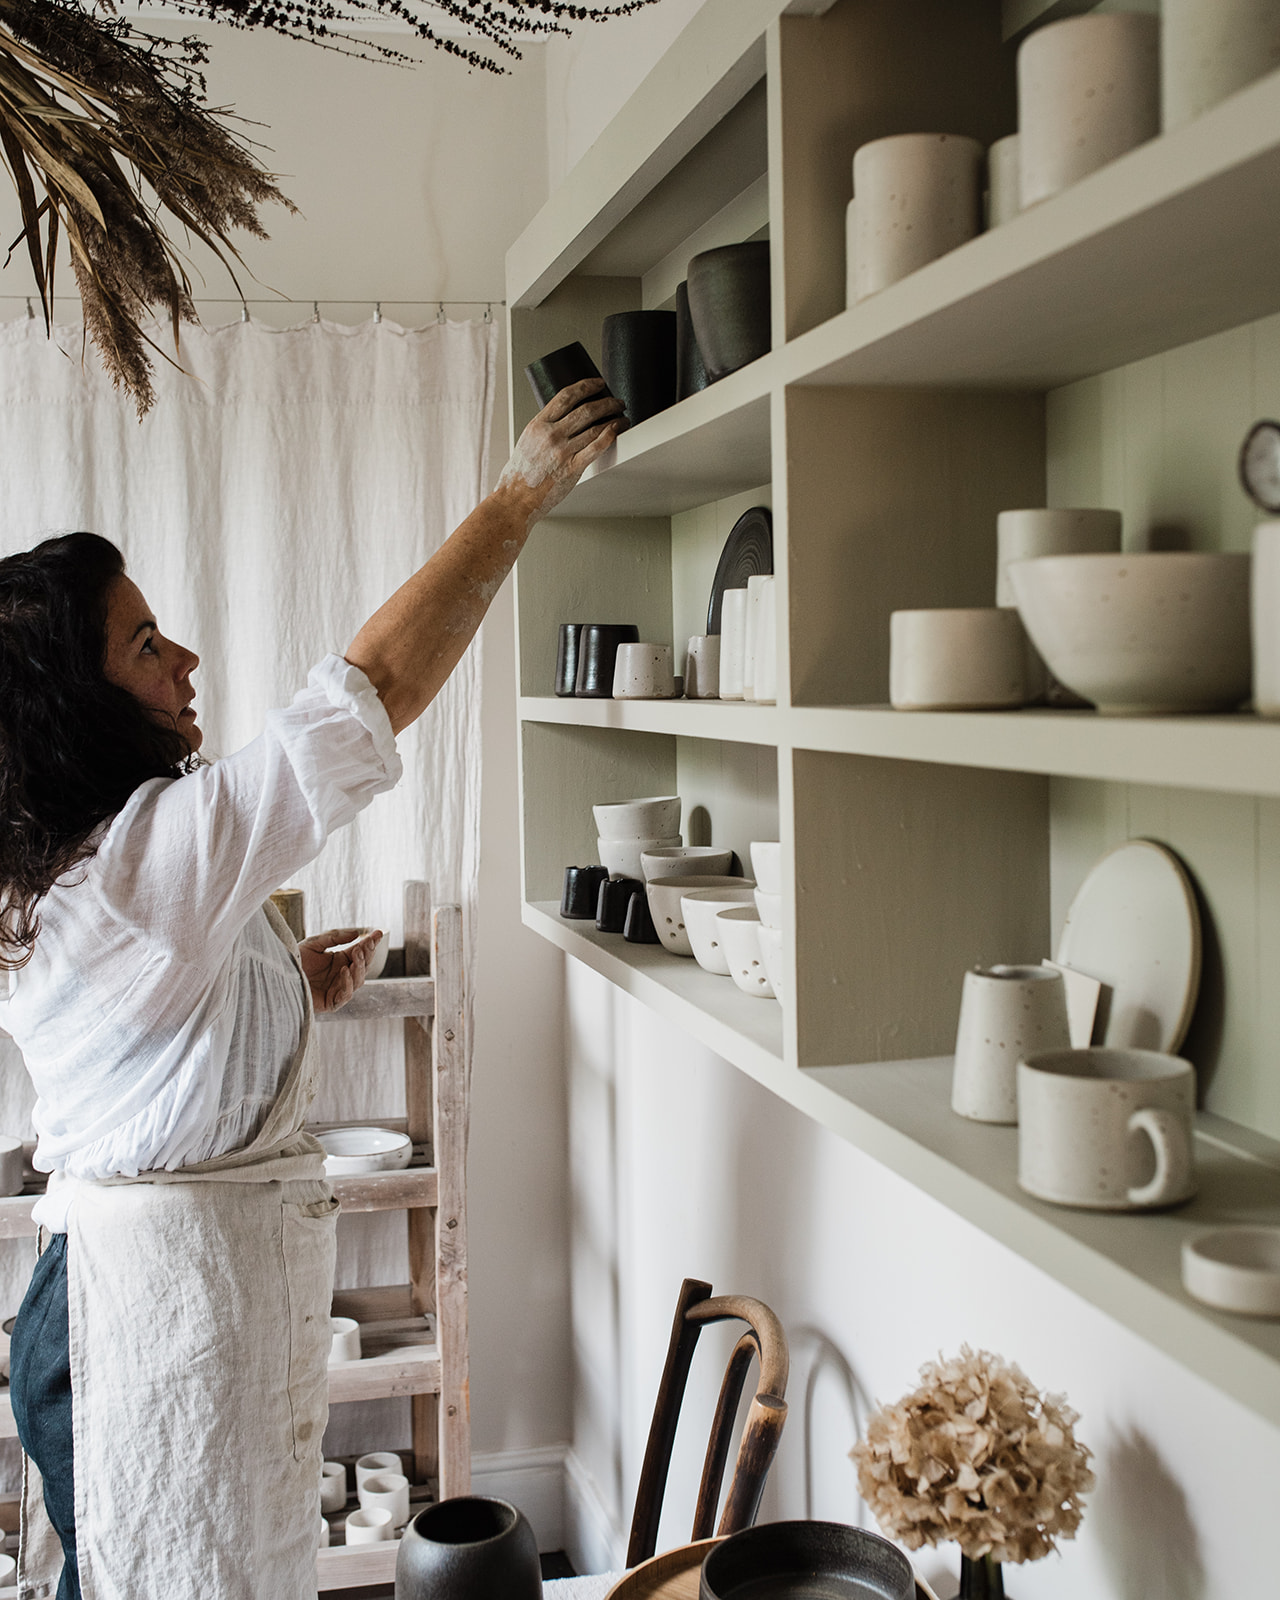 Woman reaches for ceramic jug on shelf of pottery items.